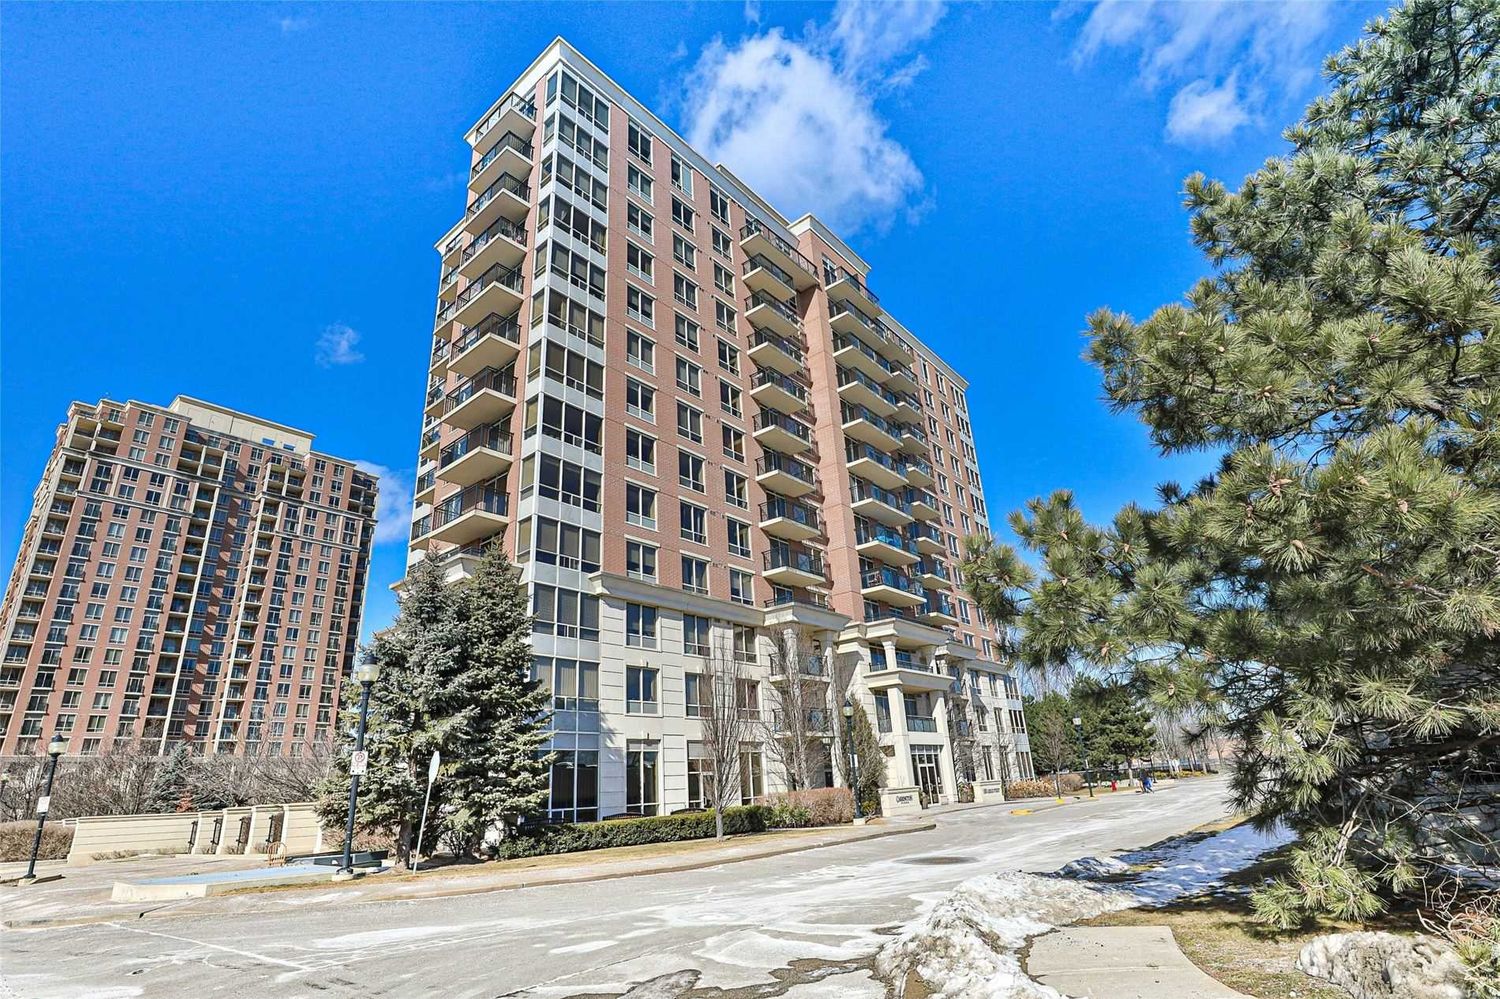 1103 Leslie Street. Carrington Place Condos is located in  North York, Toronto - image #1 of 3